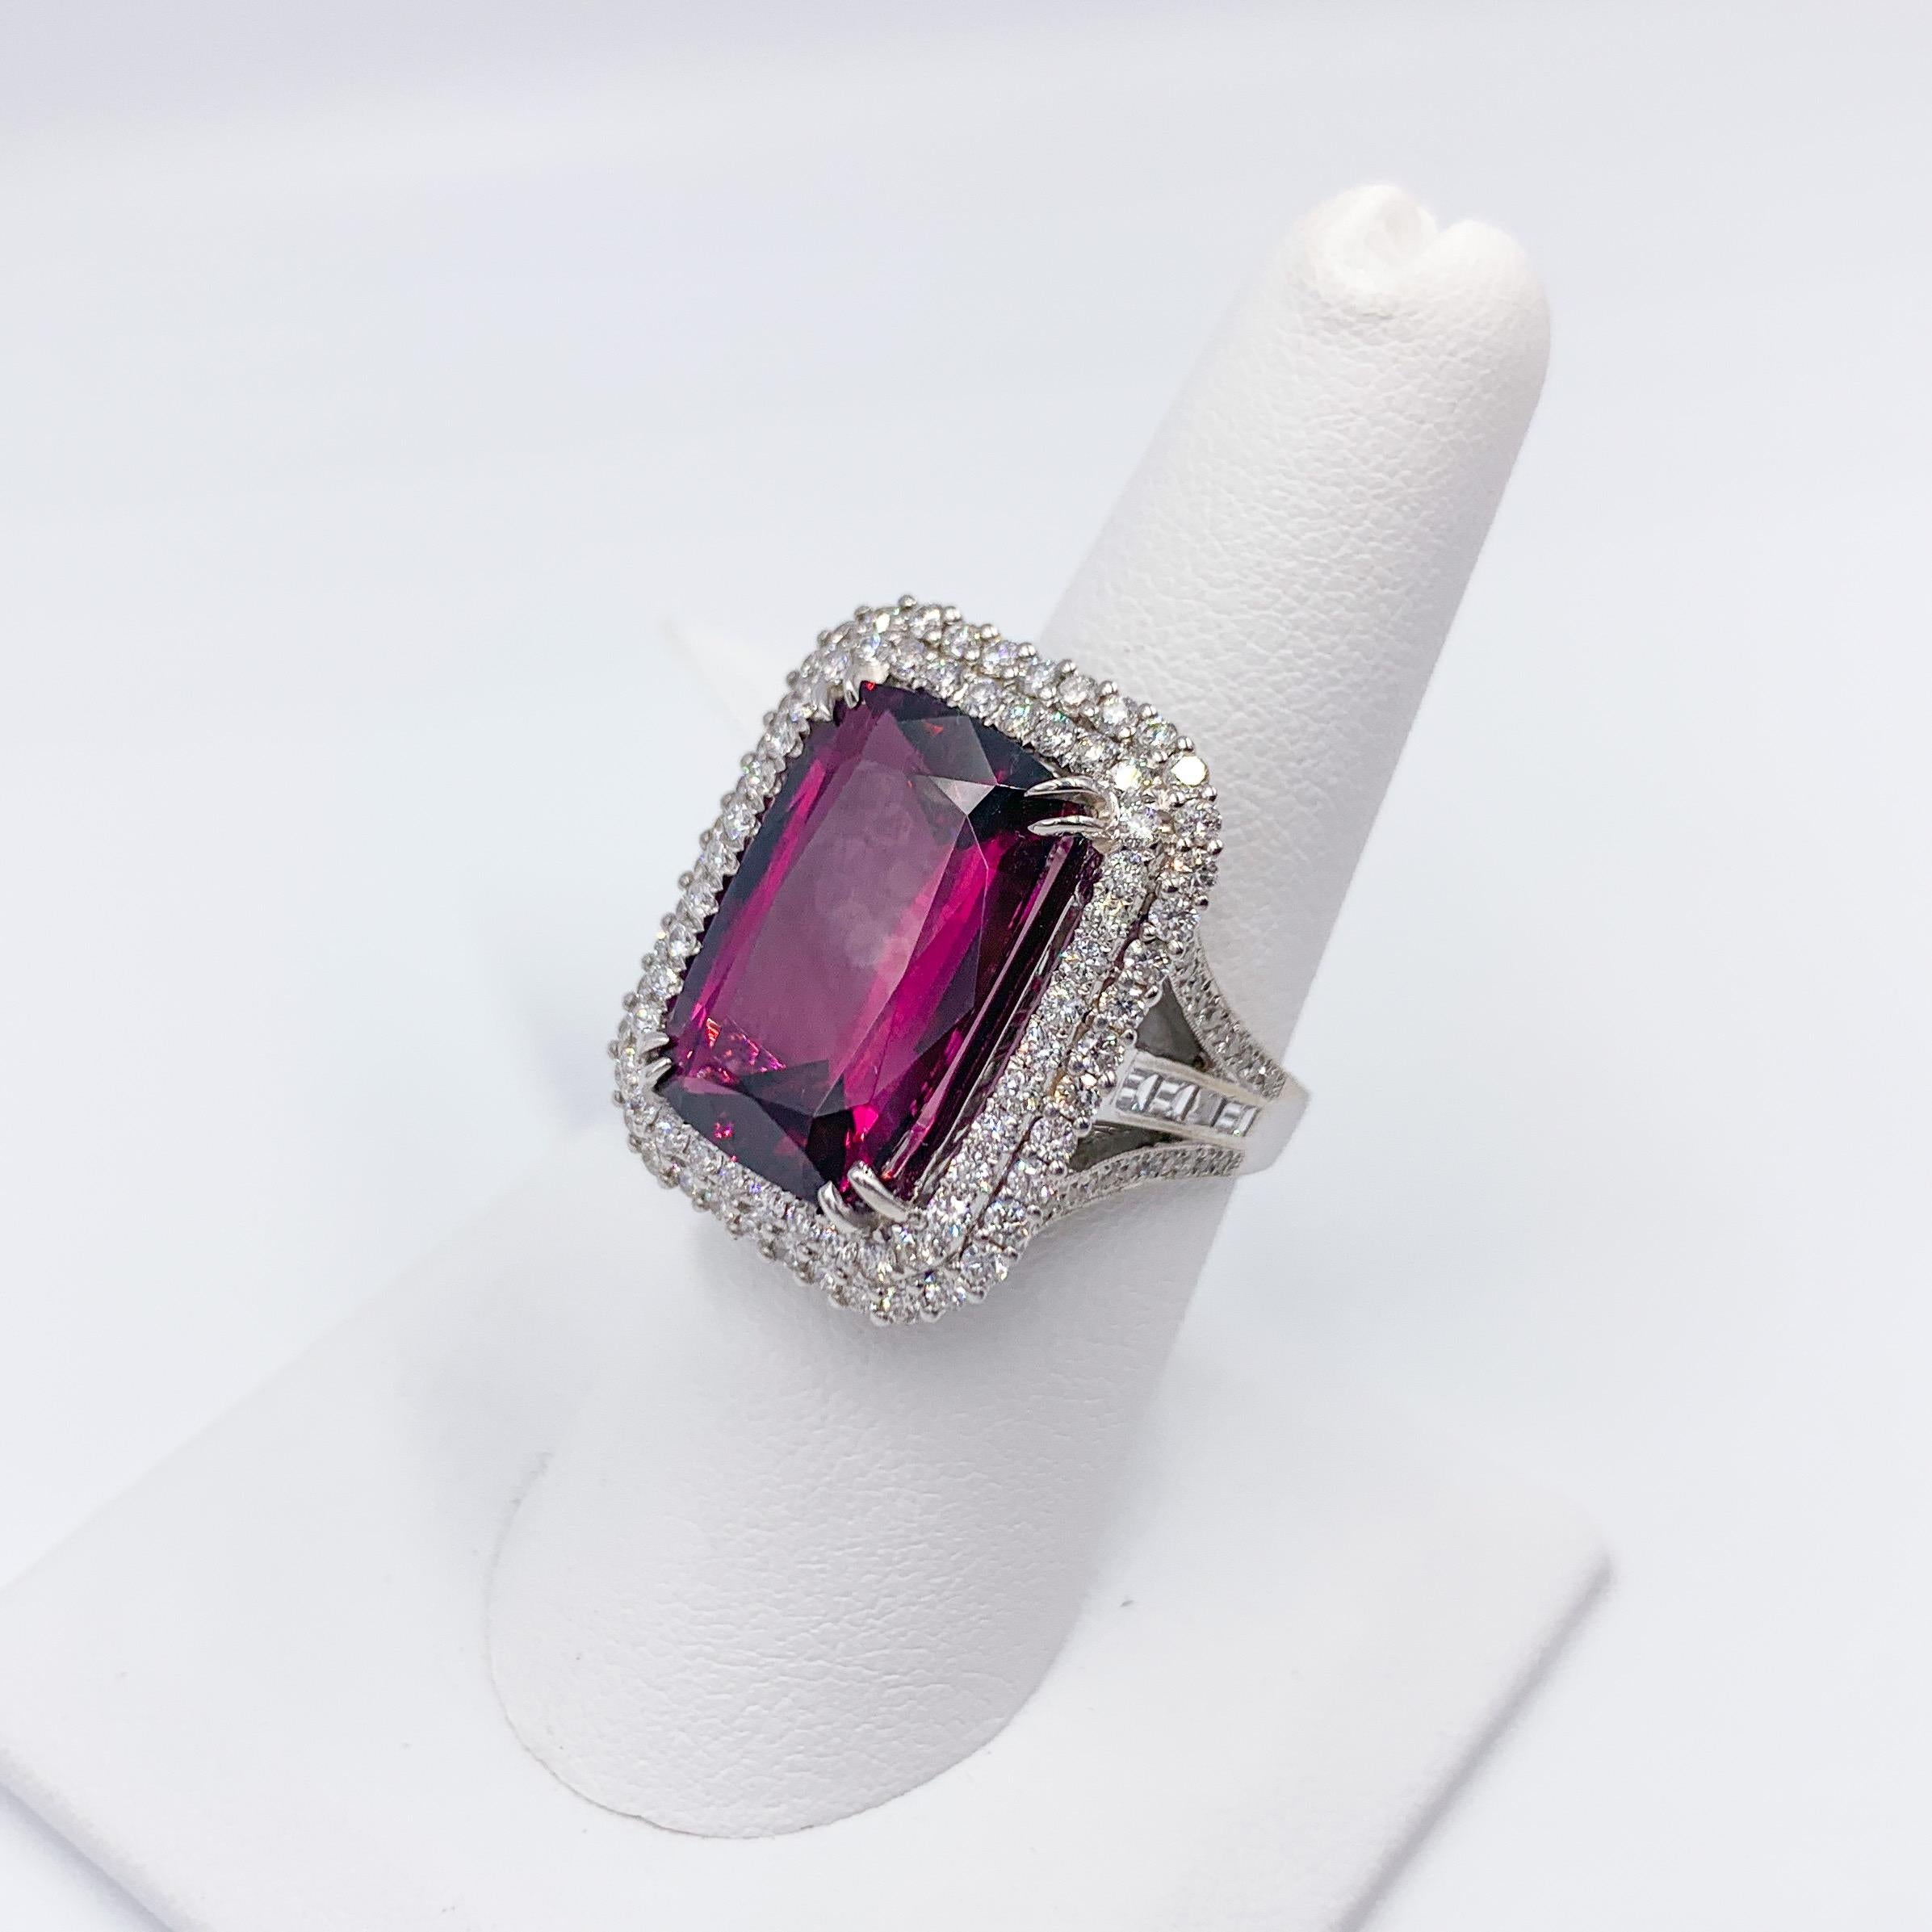 Umbalite garnet refers to the superb quality rhodolite garnet mined in the Umba River region of Tanzania. Tanzania. This Tanzanian material is premium quality, with a vivid pinkish-red or purplish-red color. 

This spectacular umbalite has a rich